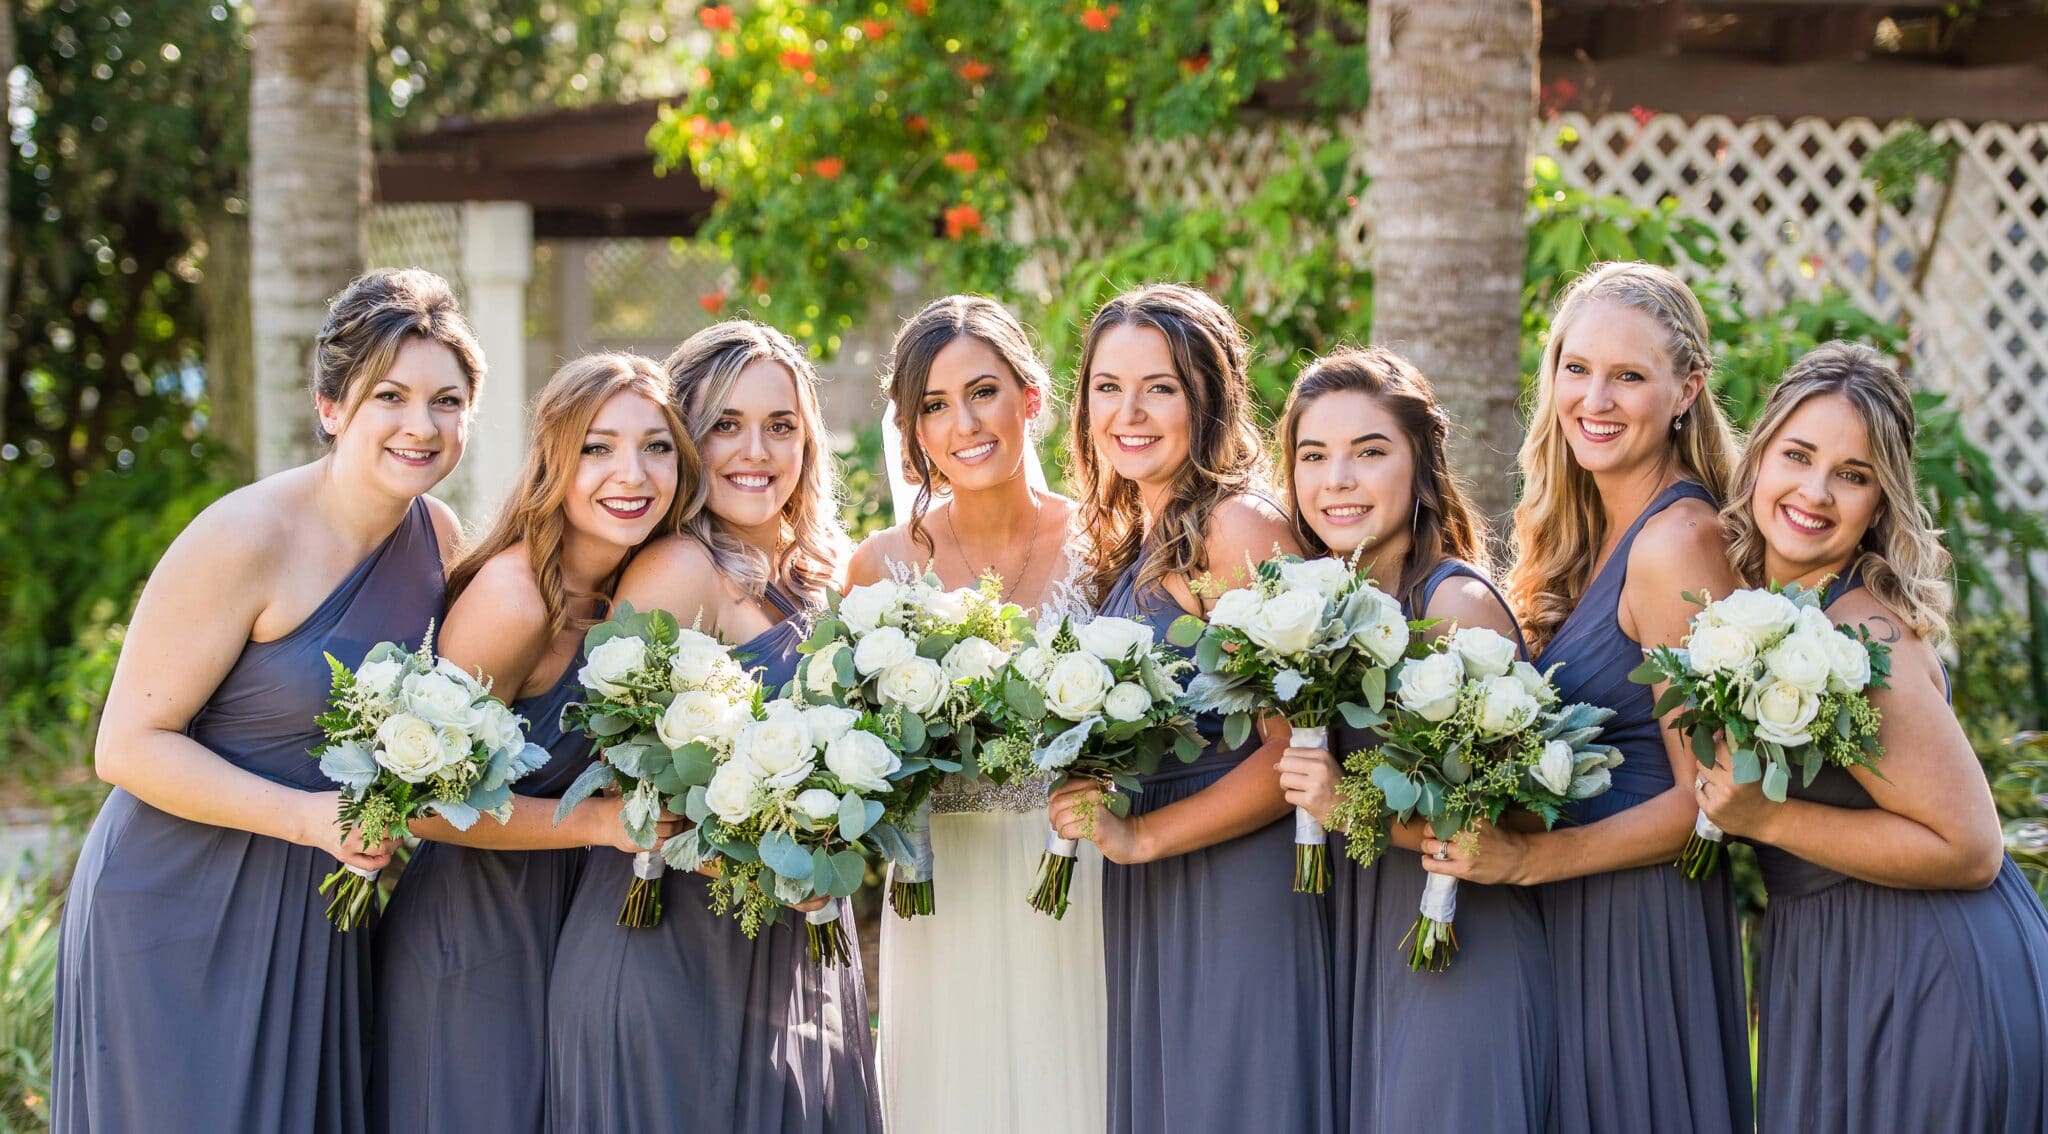 bride and her bridesmaids in matching dresses and matching bouquets